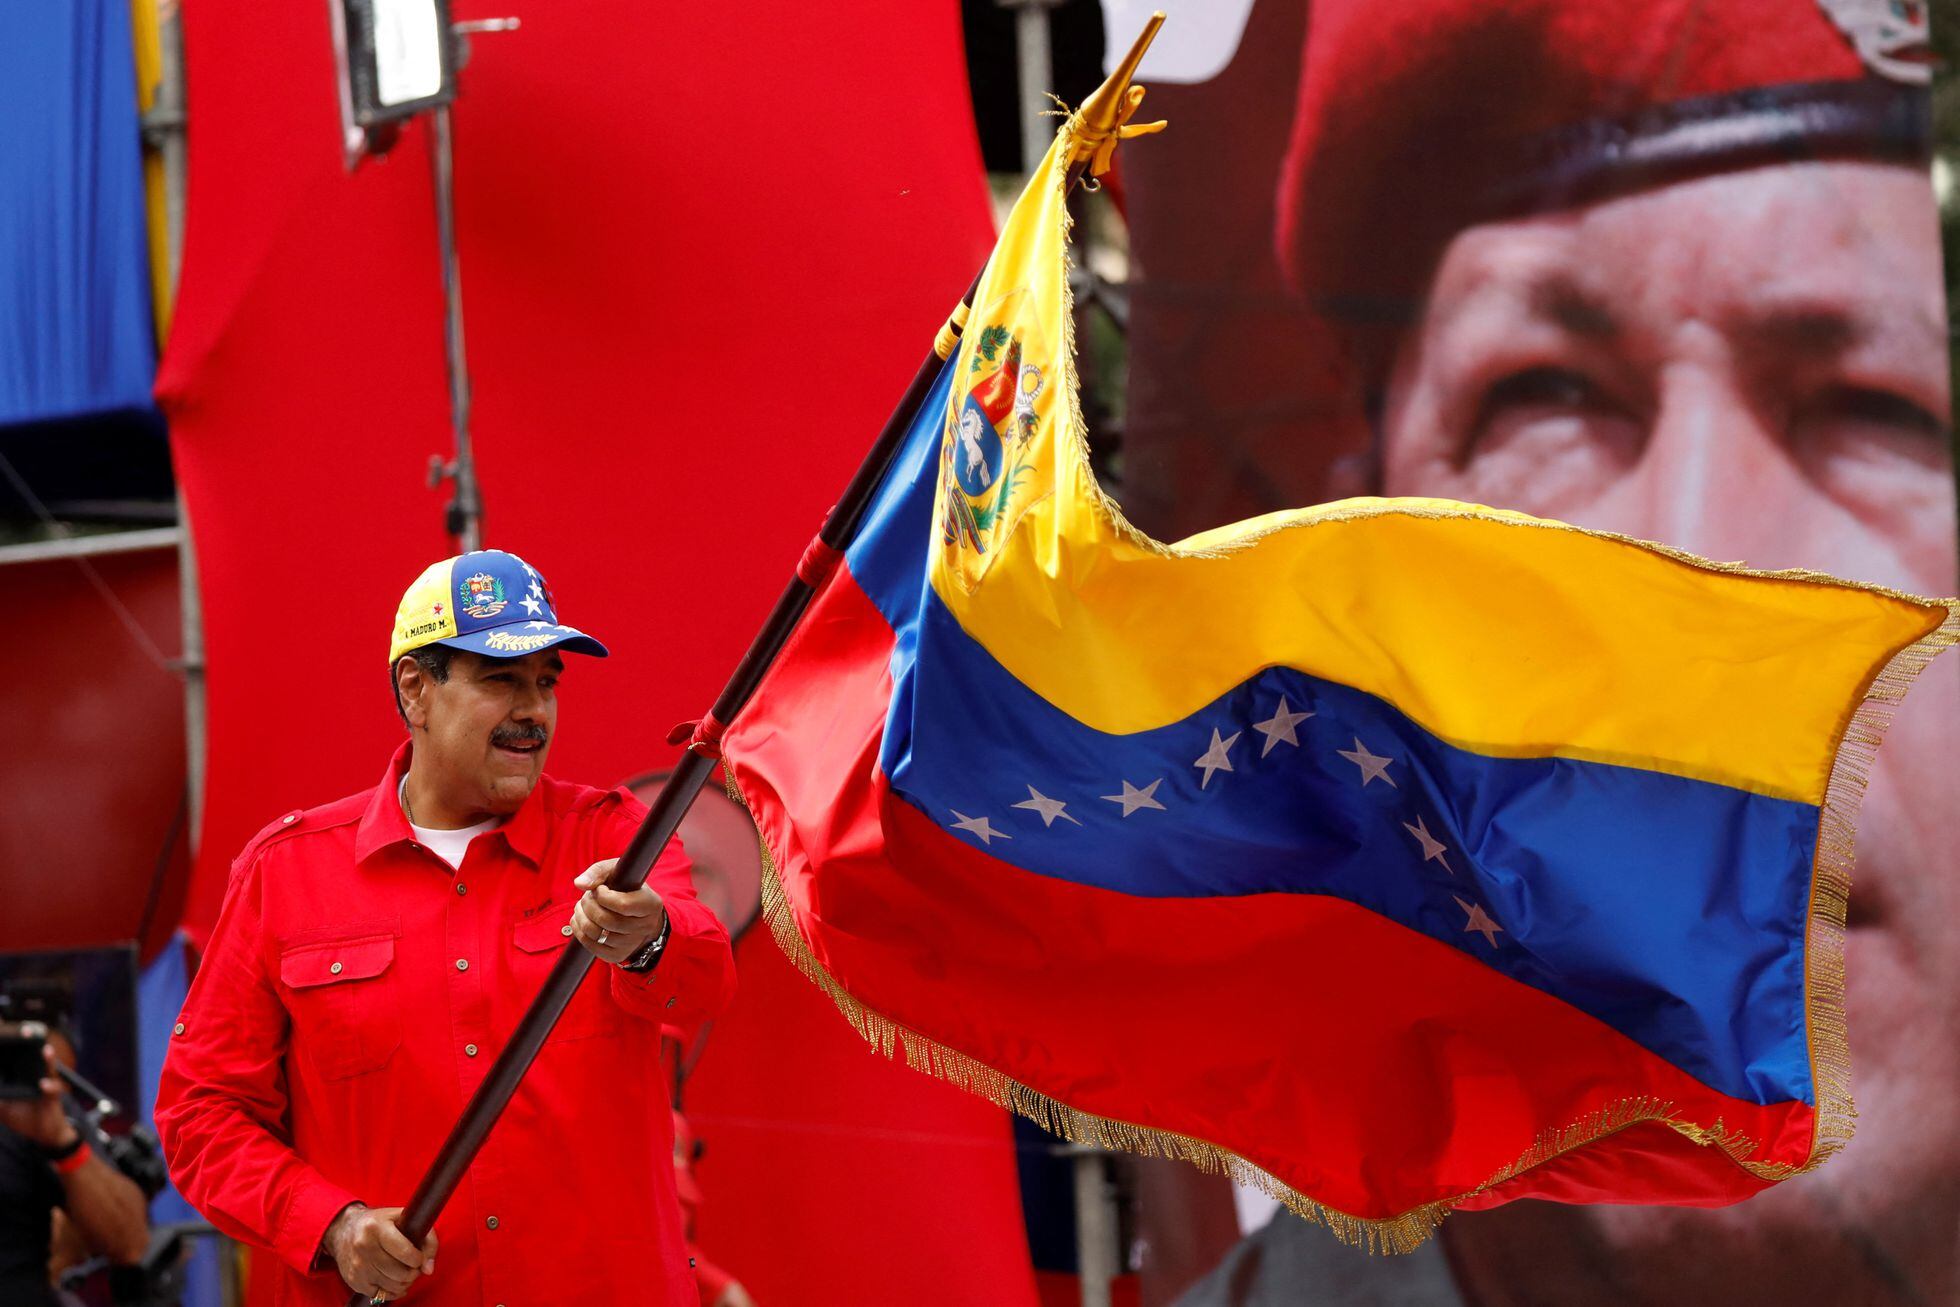 Nicolás Maduro waves a flag during a demonstration to mark the anniversary of the initial coup attempt by the late Venezuelan president, Hugo Chávez, in 1992. LEONARDO FERNANDEZ VILORIA (REUTERS)